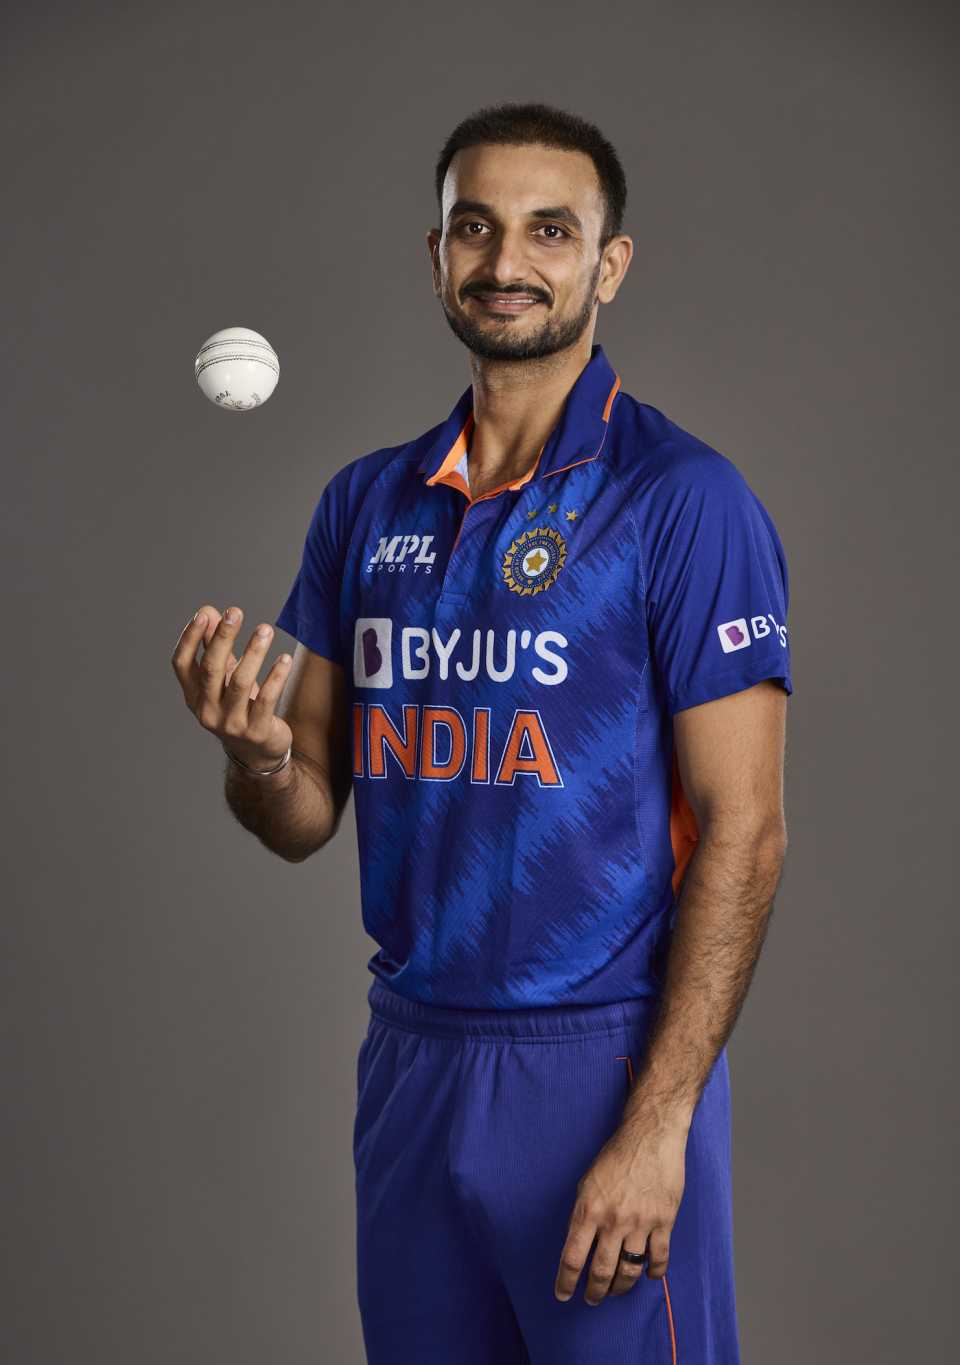 Harshal Patel portrait ahead of the first T20I, England vs India, 1st T20I, Southampton, July 6, 2022
